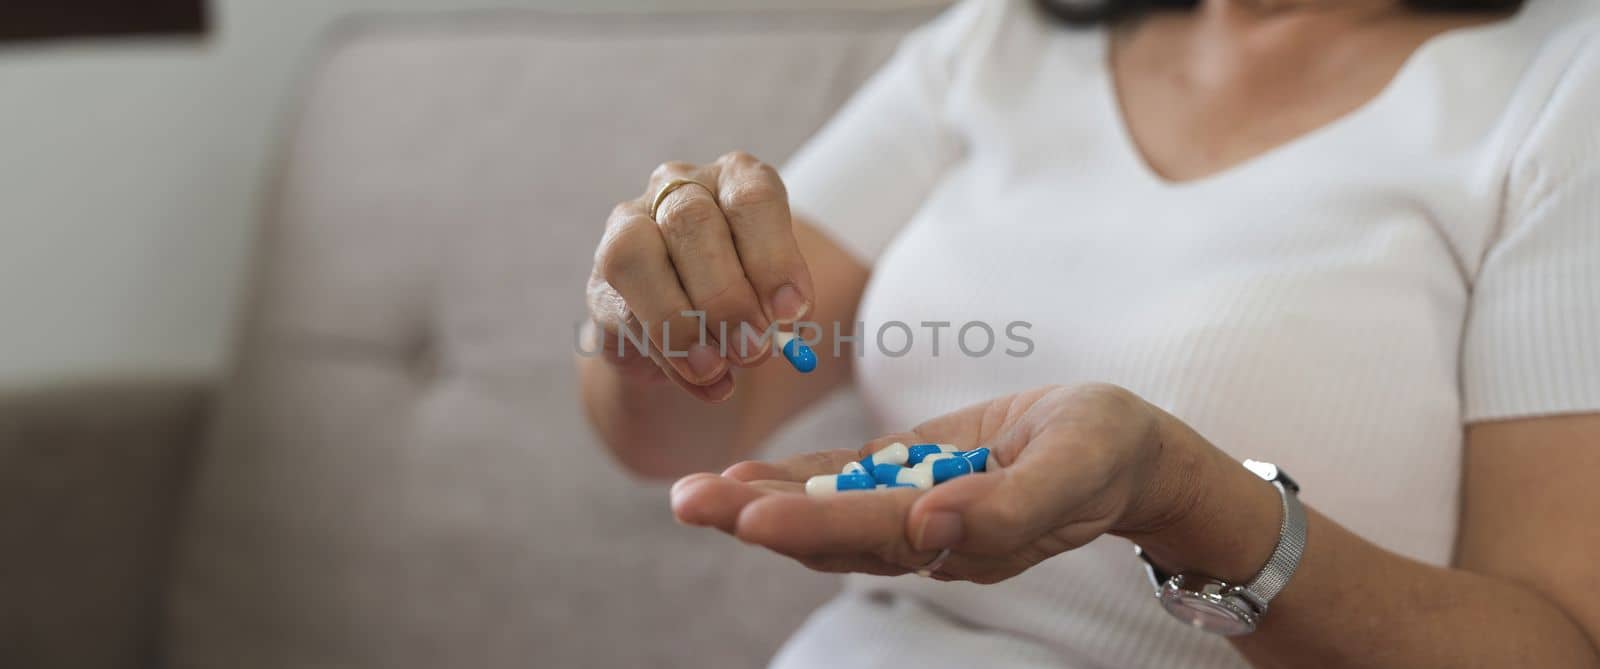 Elderly sick ill woman hold pills on hand pouring capsules from medication bottle take painkiller supplement medicine, old senior people pharmaceutical healthcare treatment concept, close up view by nateemee